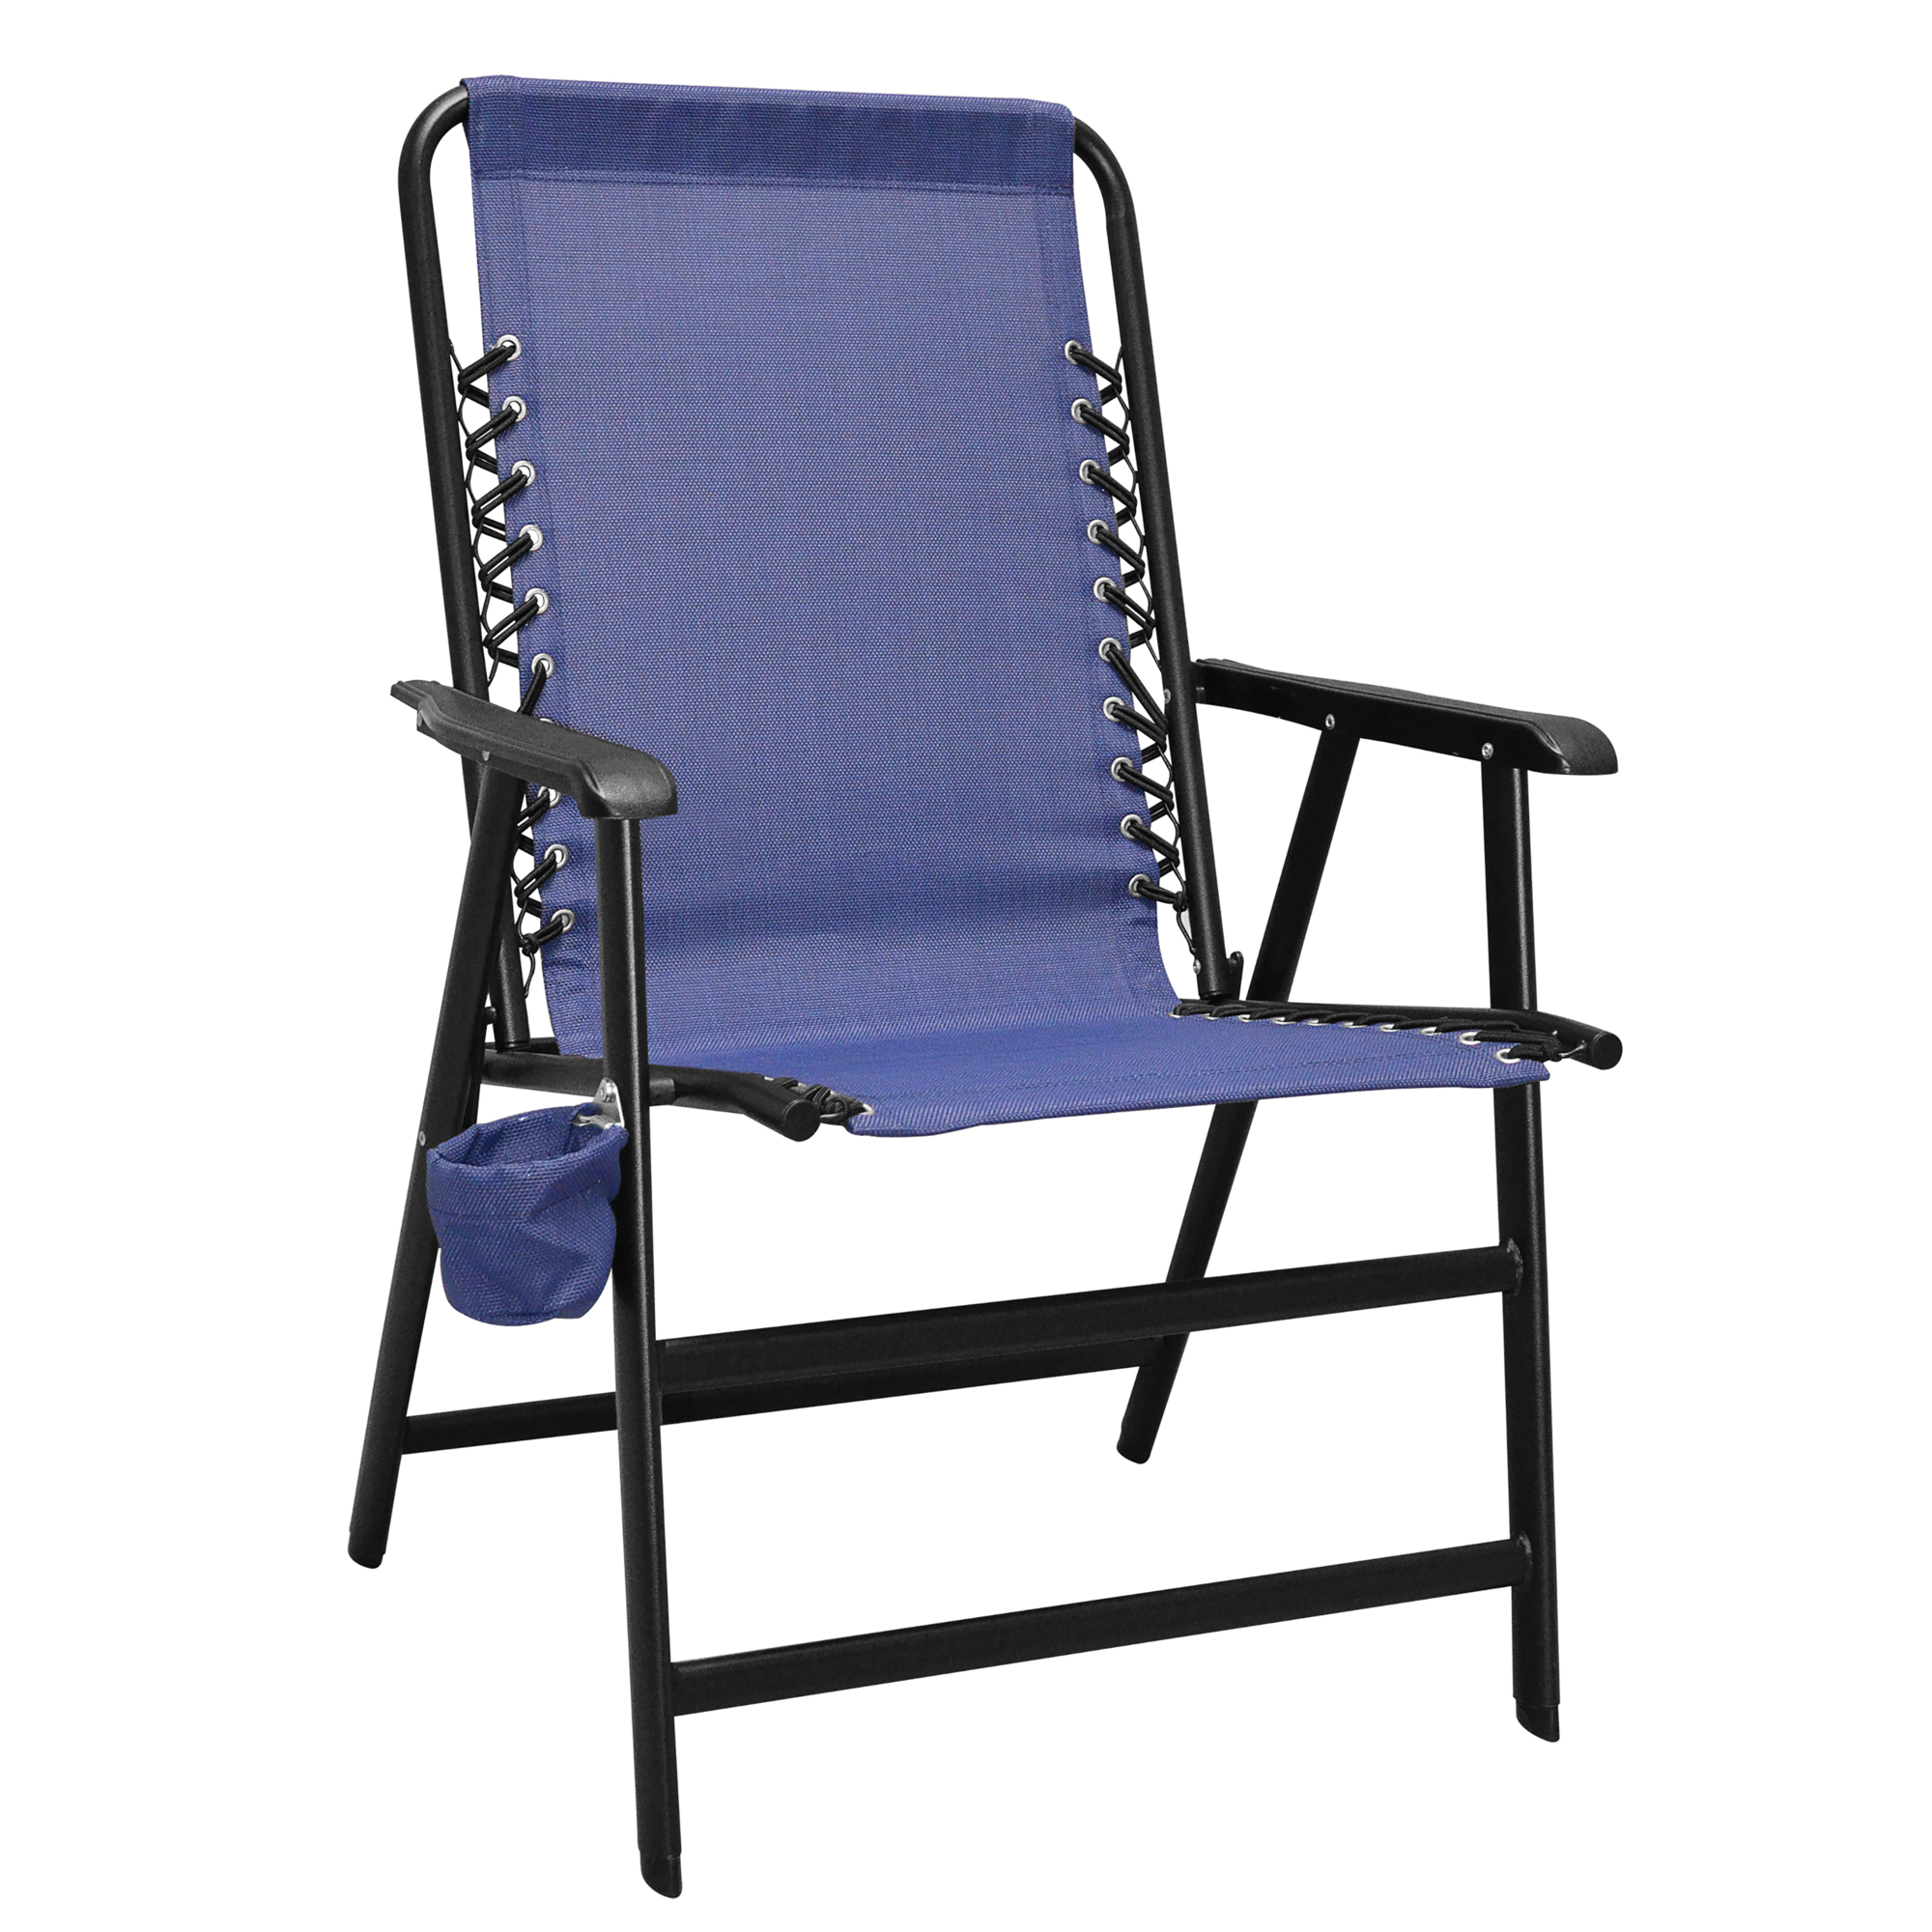 Caravan Canopy, Infinity XL Suspension Folding Chair, Primary Color Blue, Material Textile, Width 25.59 in, Model 80012100020